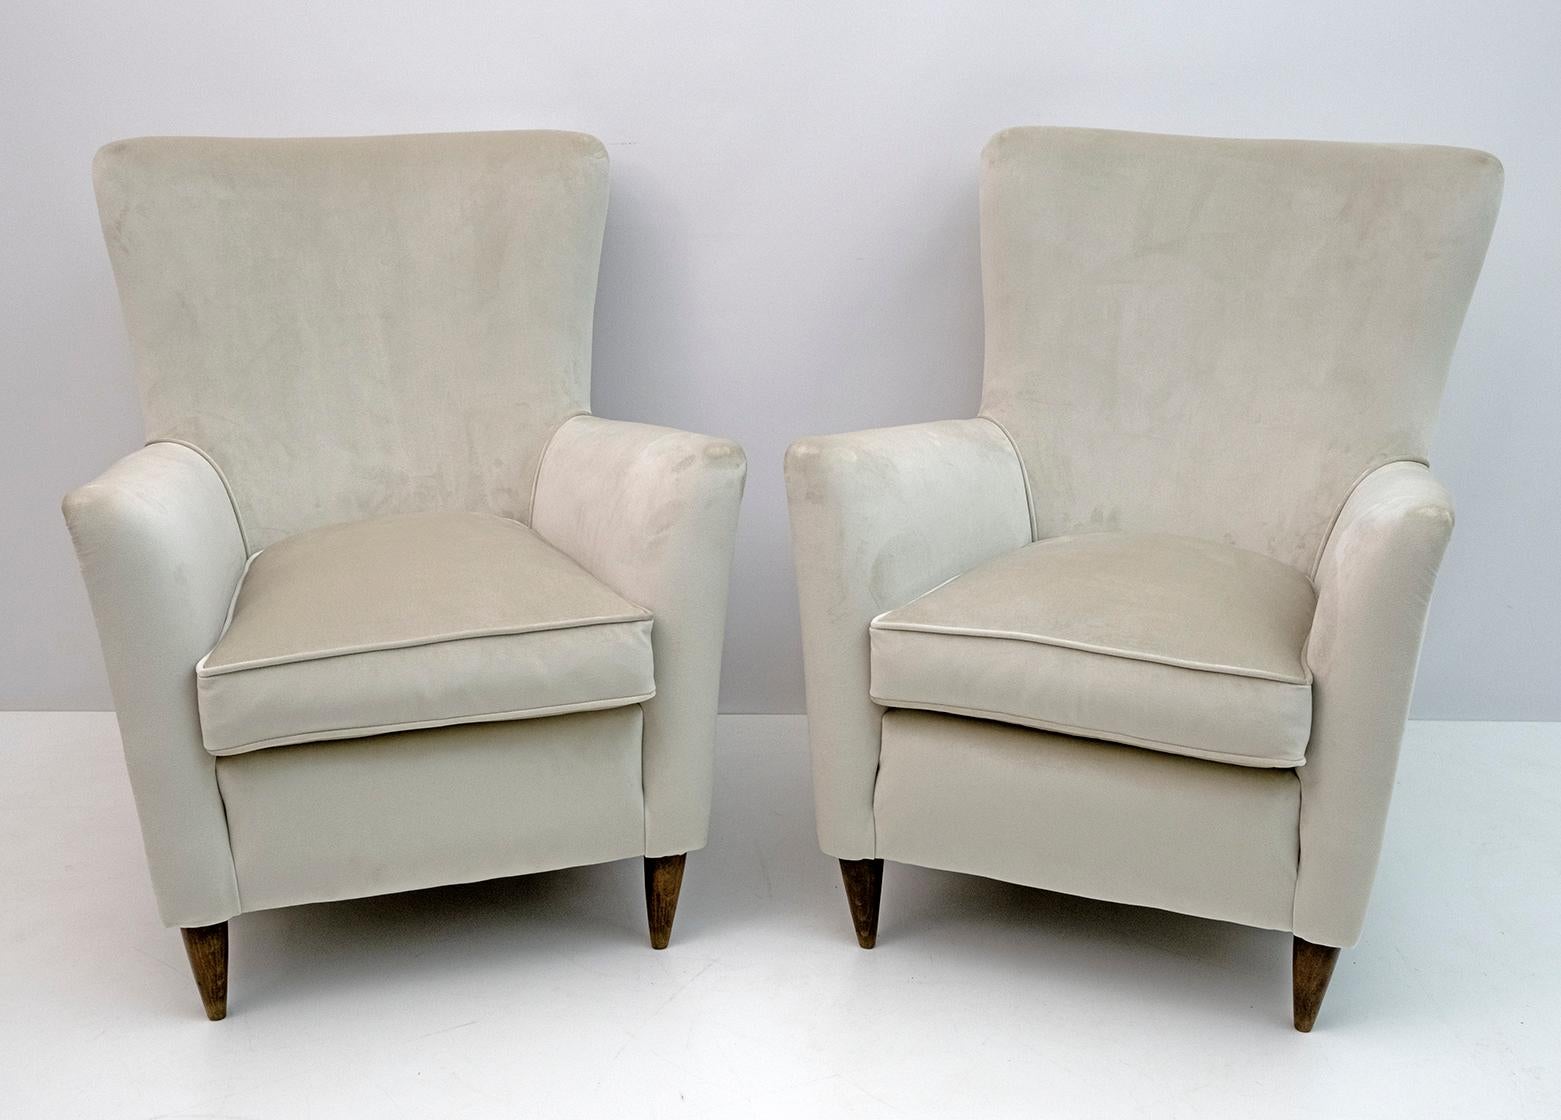 Elegant and splendid pair of Mid-Century Modern armchairs, attributed to Gio Ponti, 1950 for ISA Editions, Bergamo. The armchairs have a new light ivory velvet upholstery.